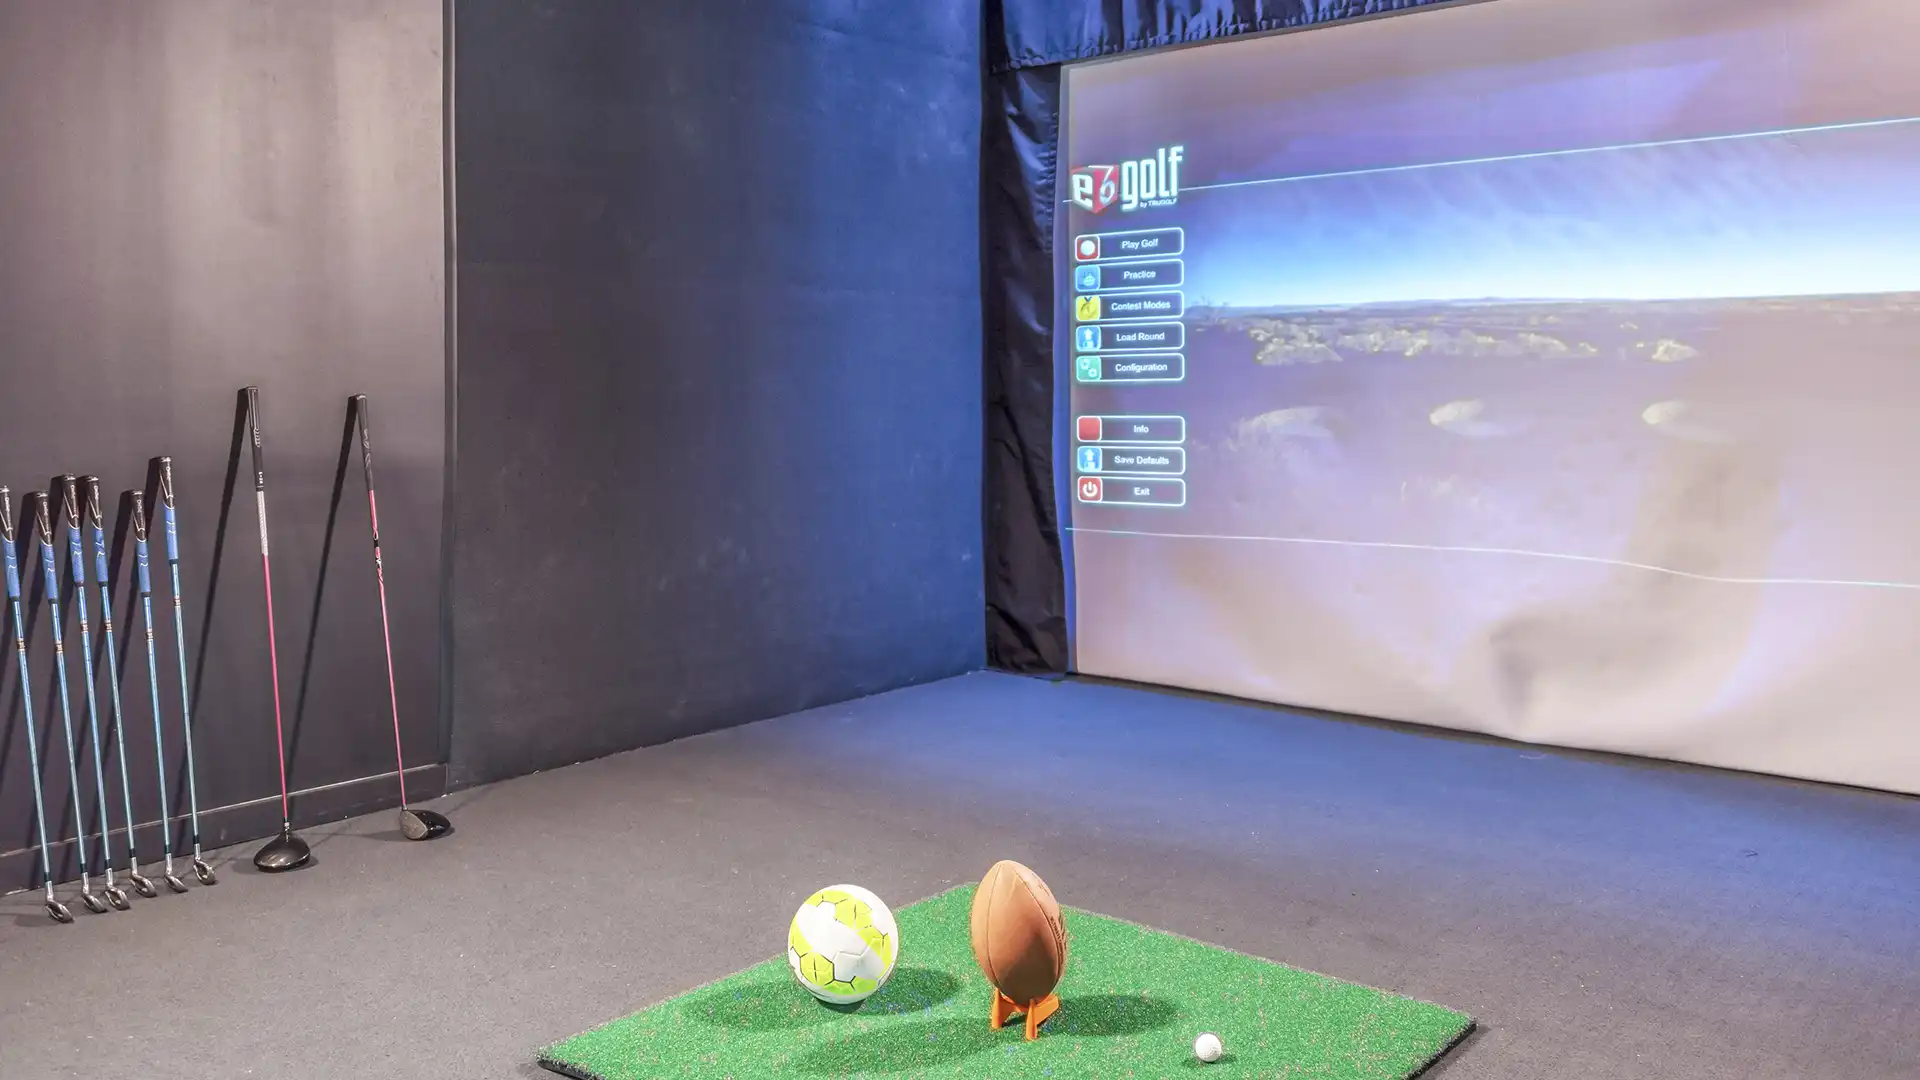 play golf, football or soccer in the sports simulation room